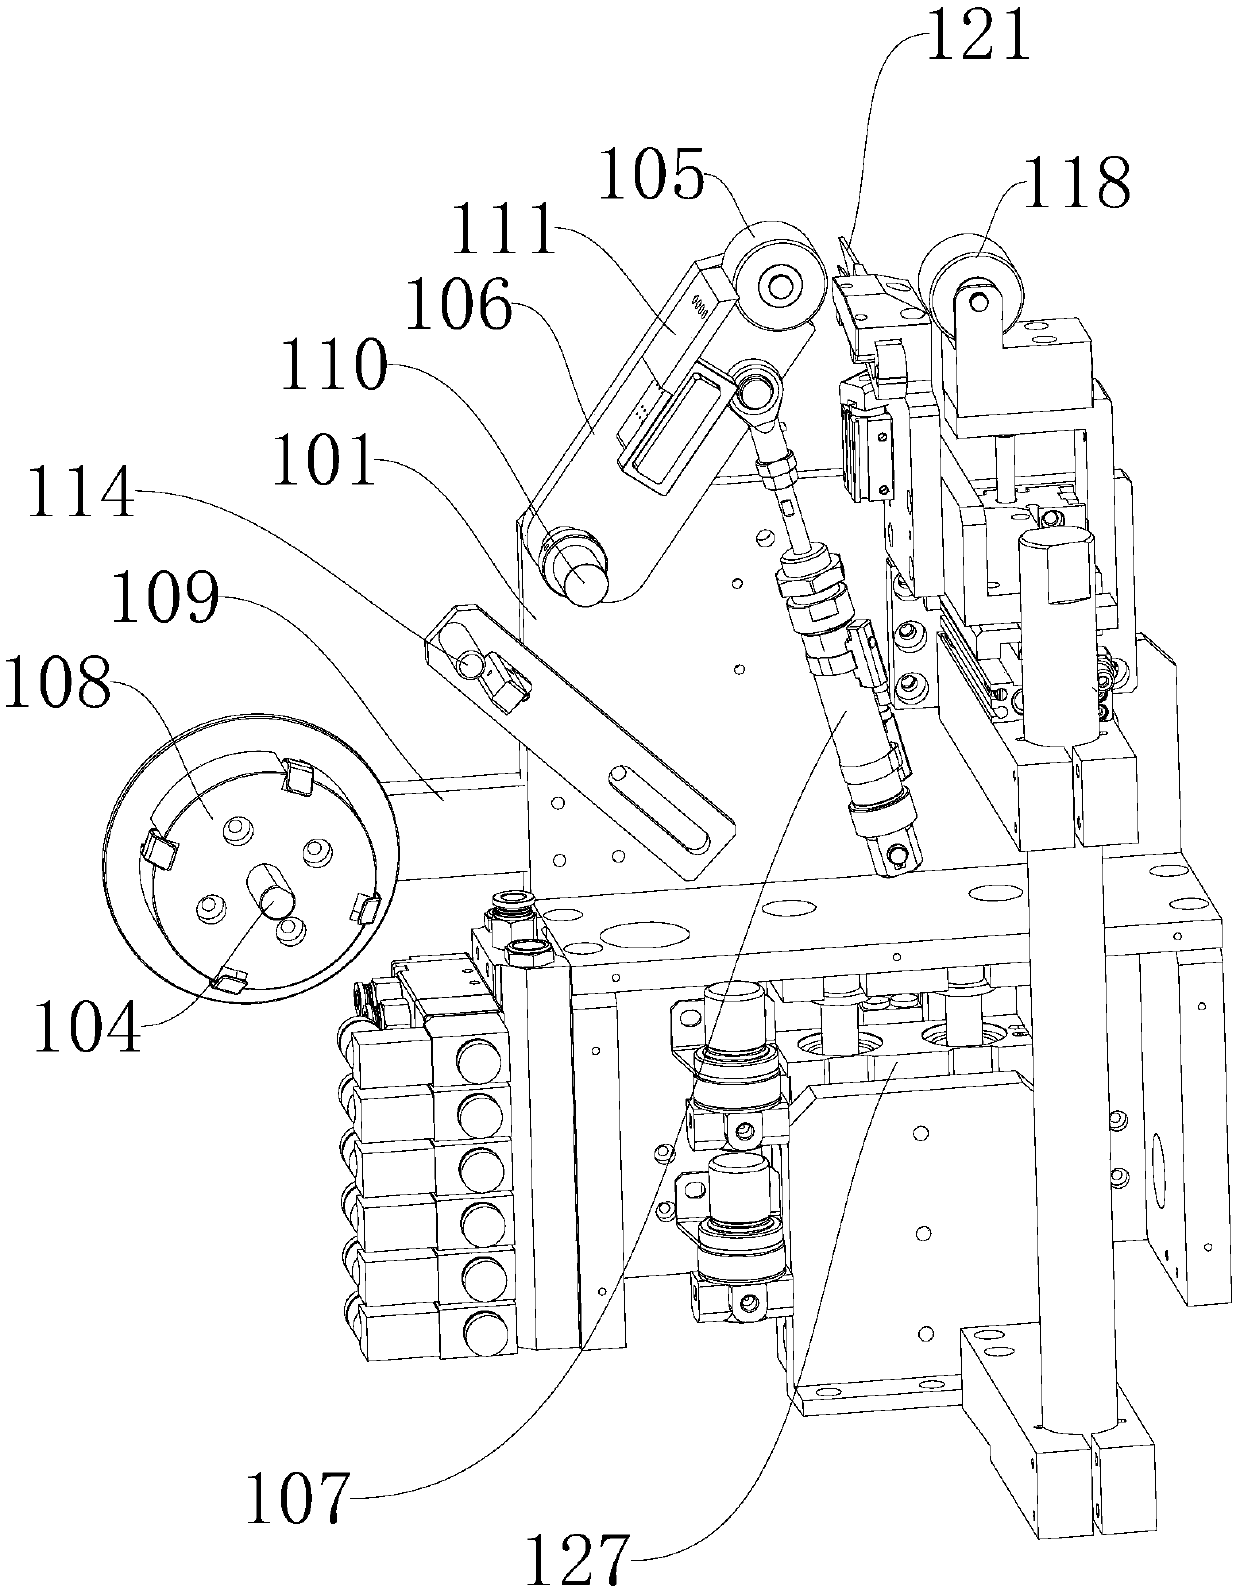 Inclined gummed paper pasting device and gummed paper pasting system